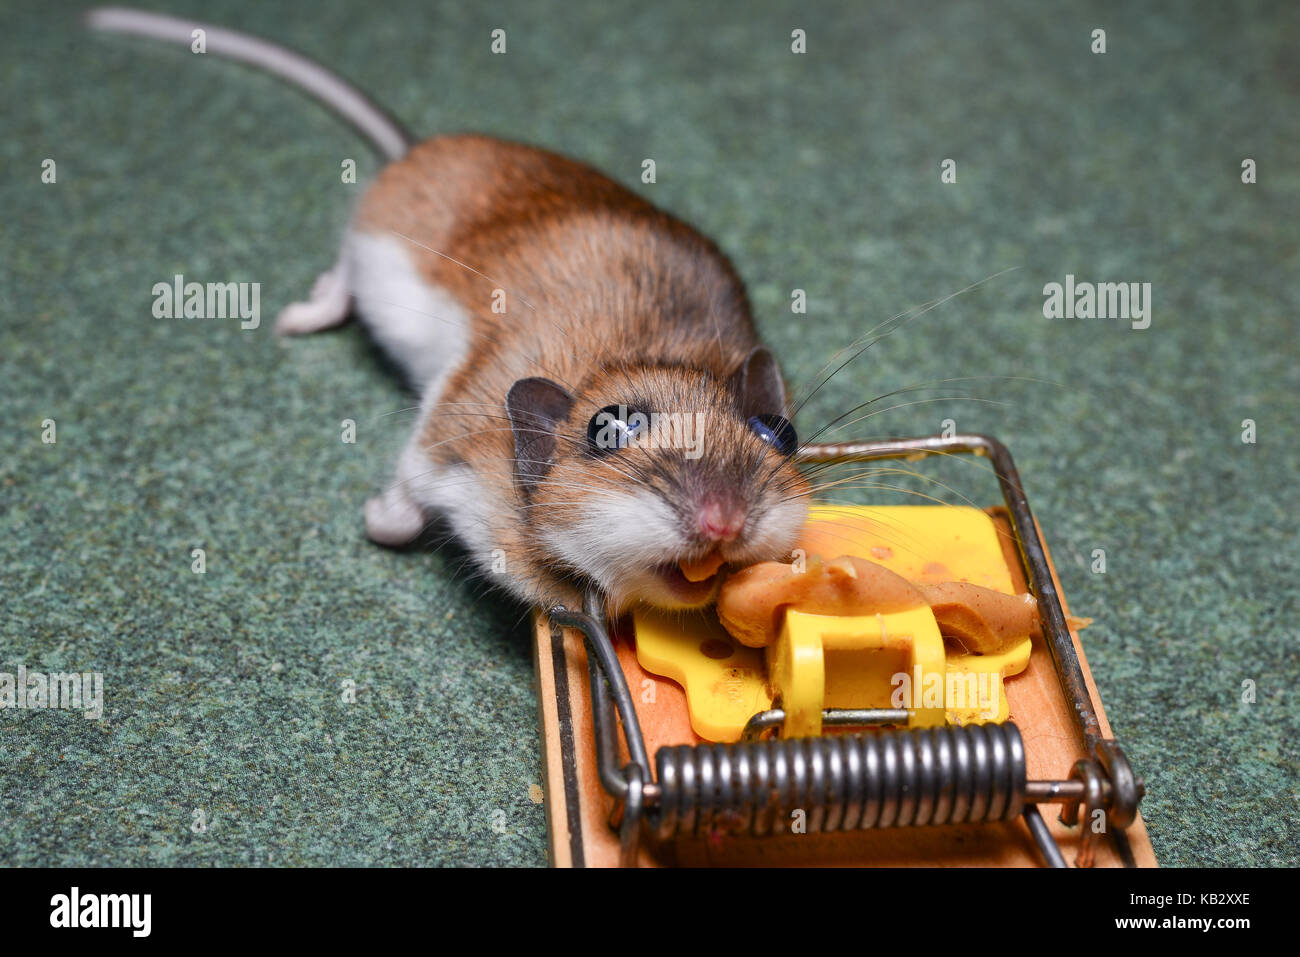 old vintage wood mouse trap Stock Photo - Alamy